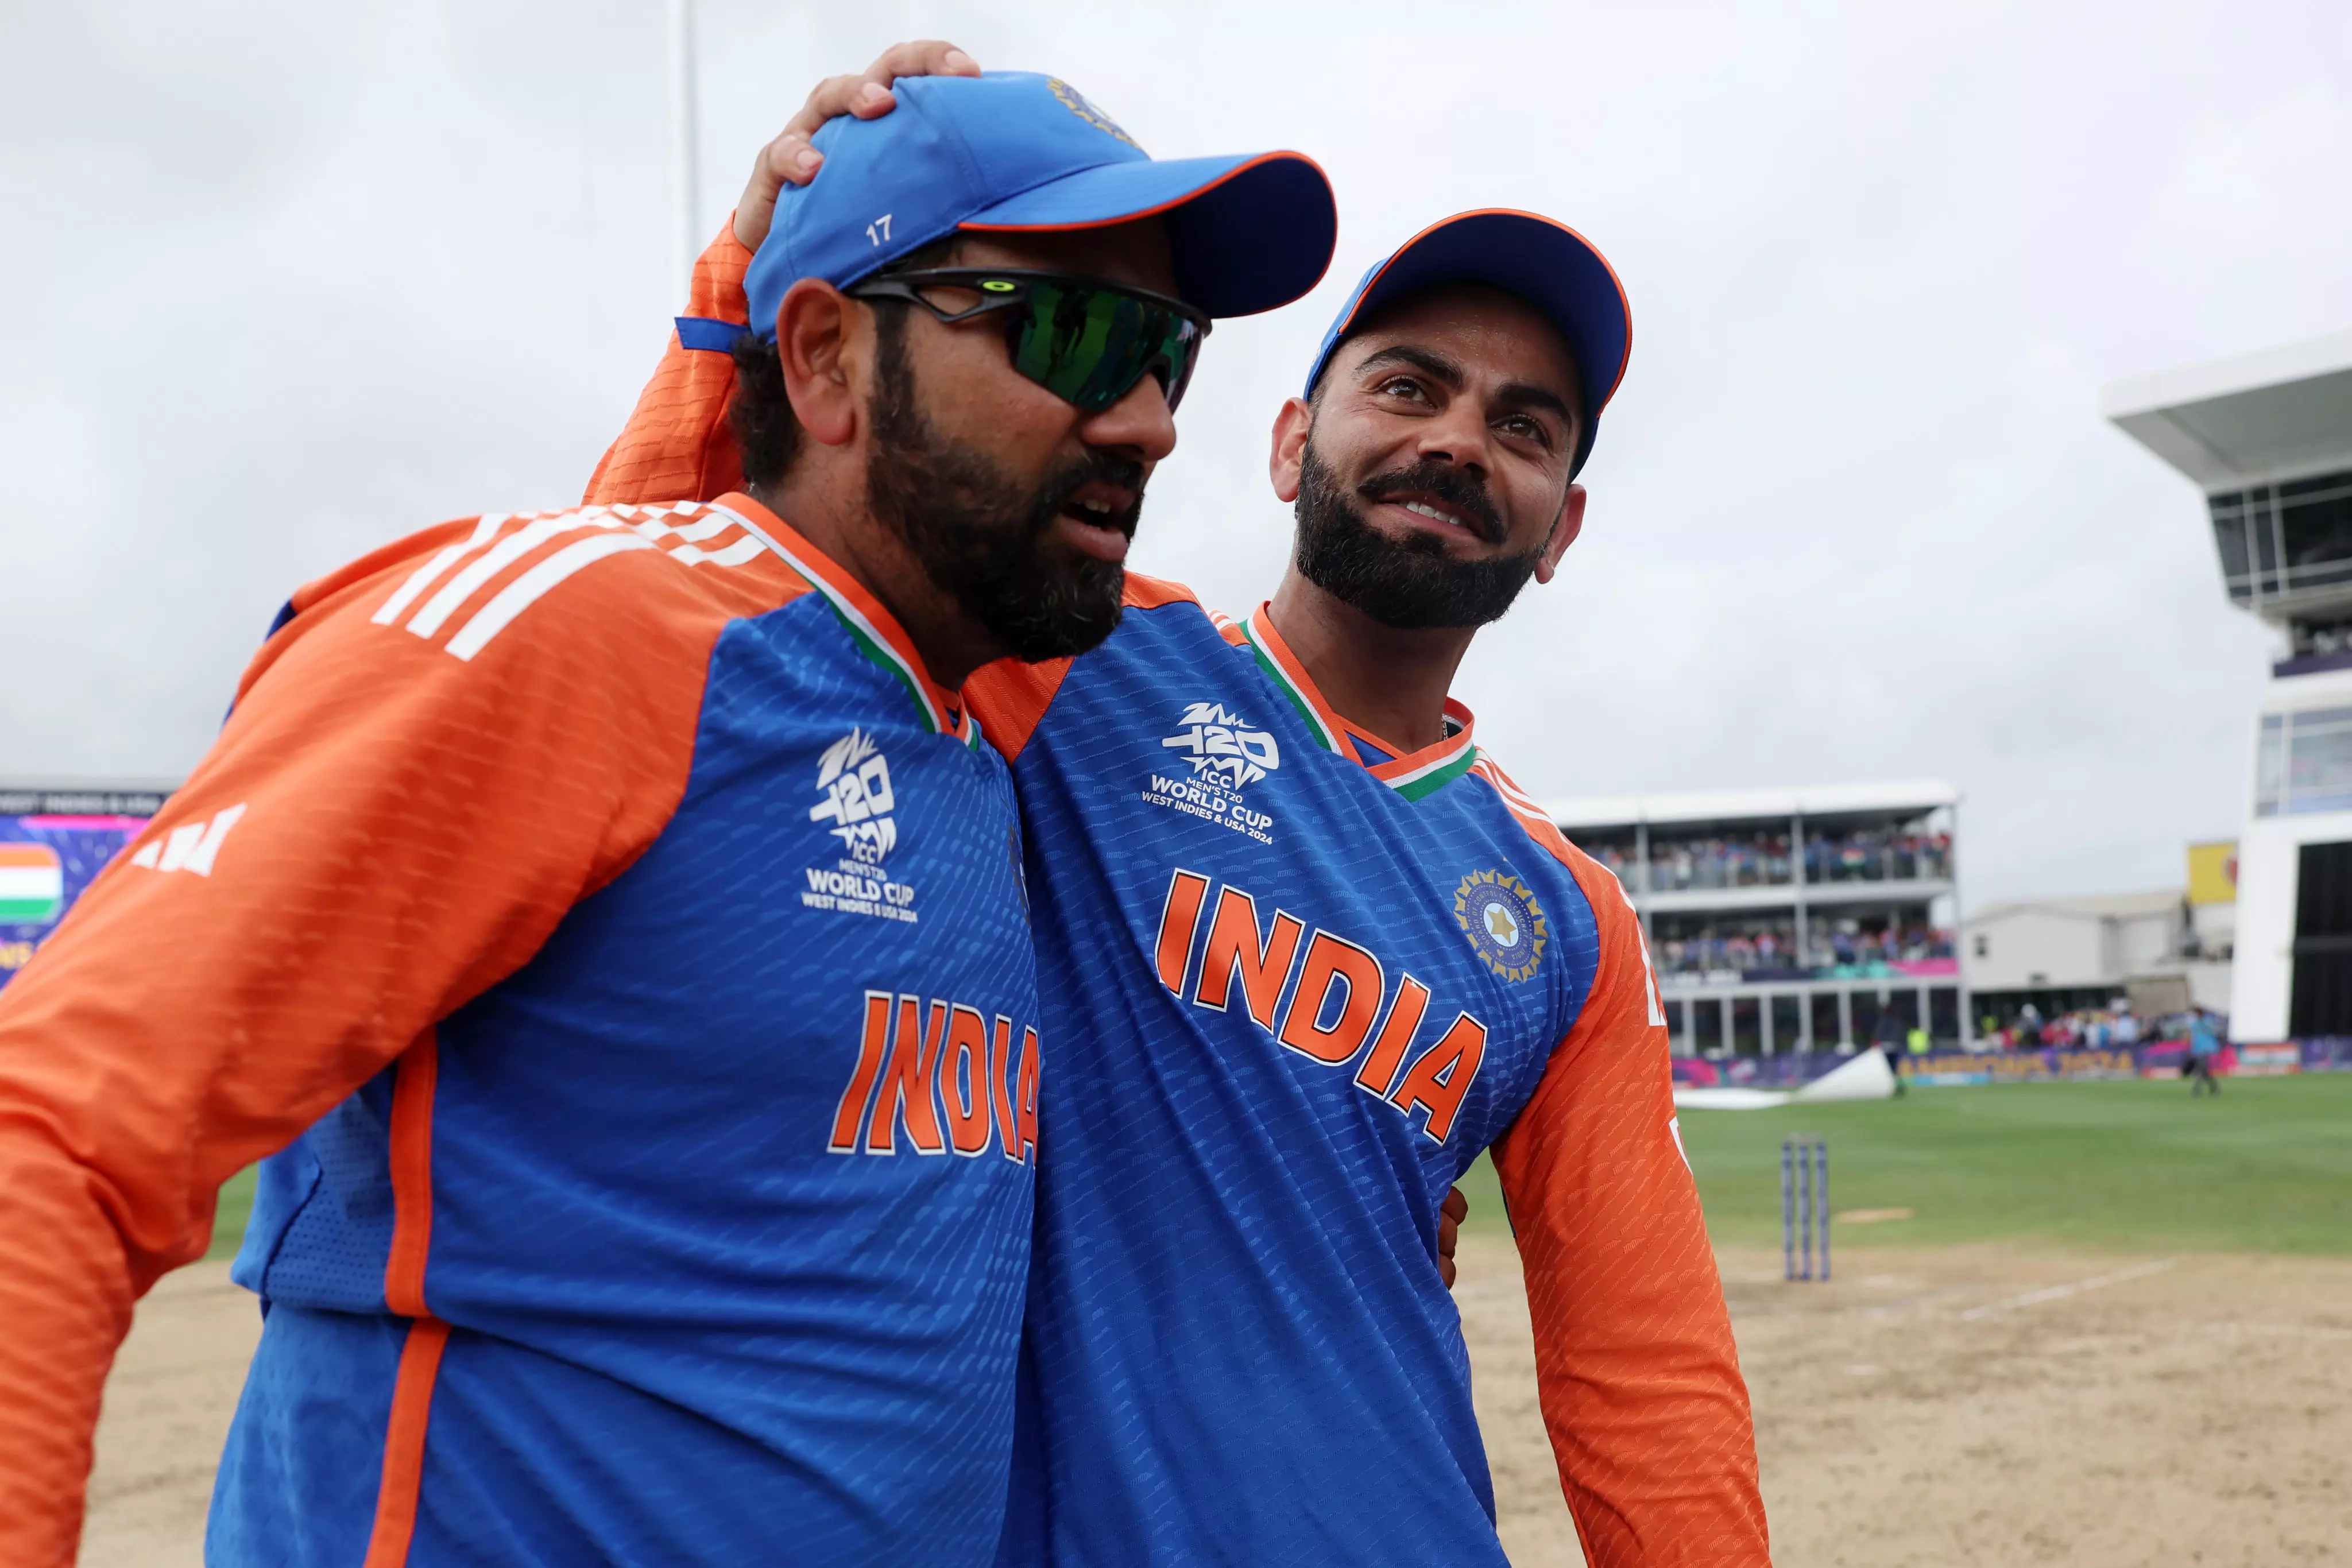 Ro-Kos last roar | In triumph and retirement, Rohit and Kohli stick together